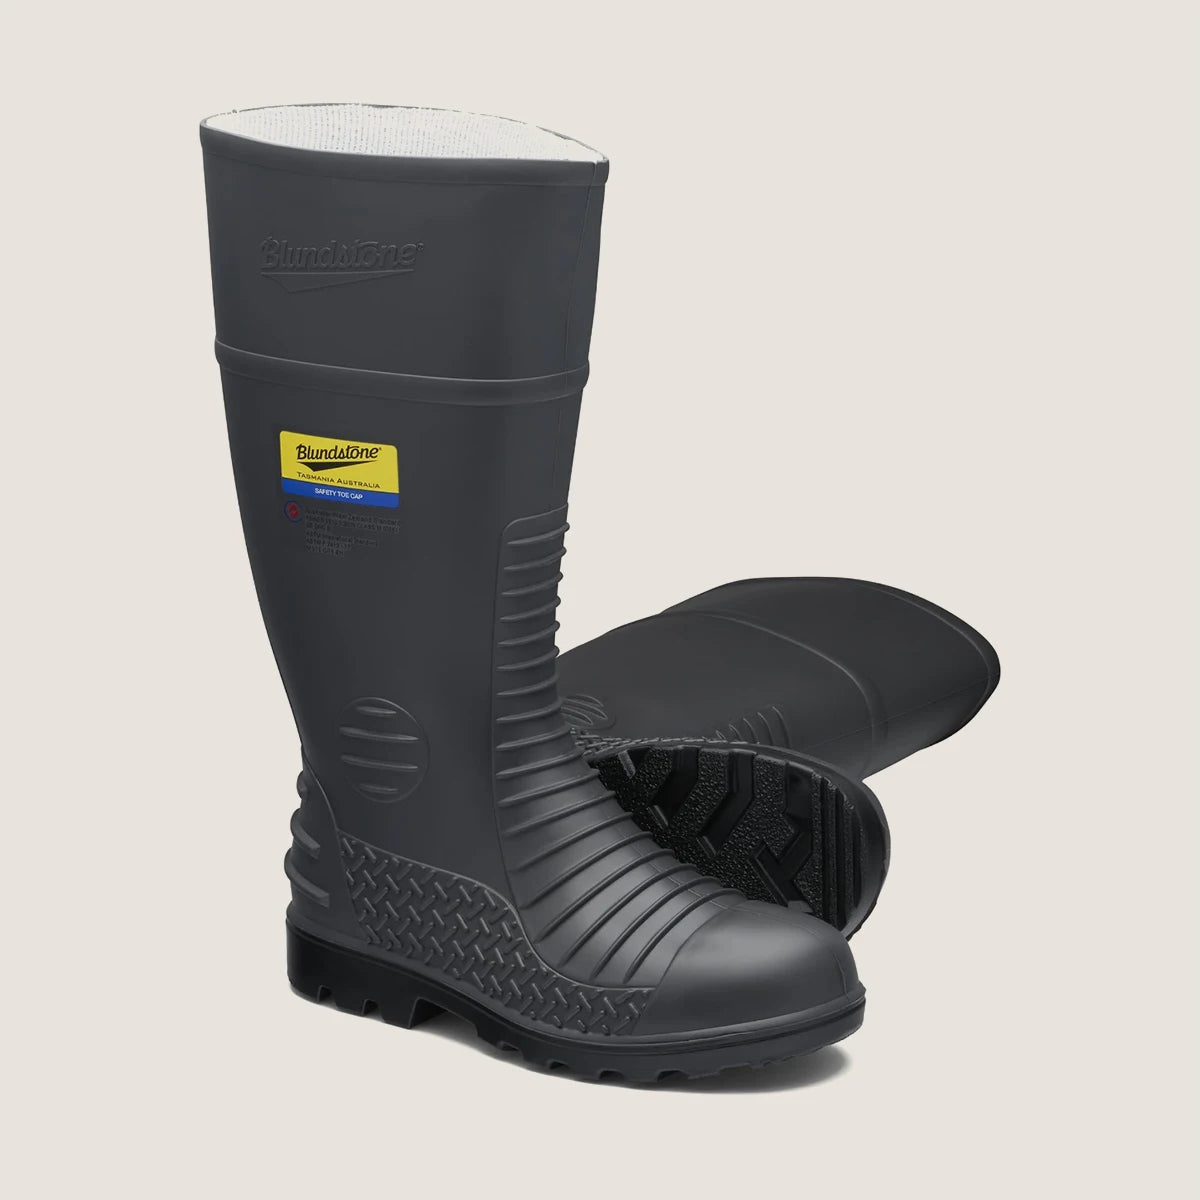 Blundstone 025 Safety Steel Toe Gumboots (Grey)